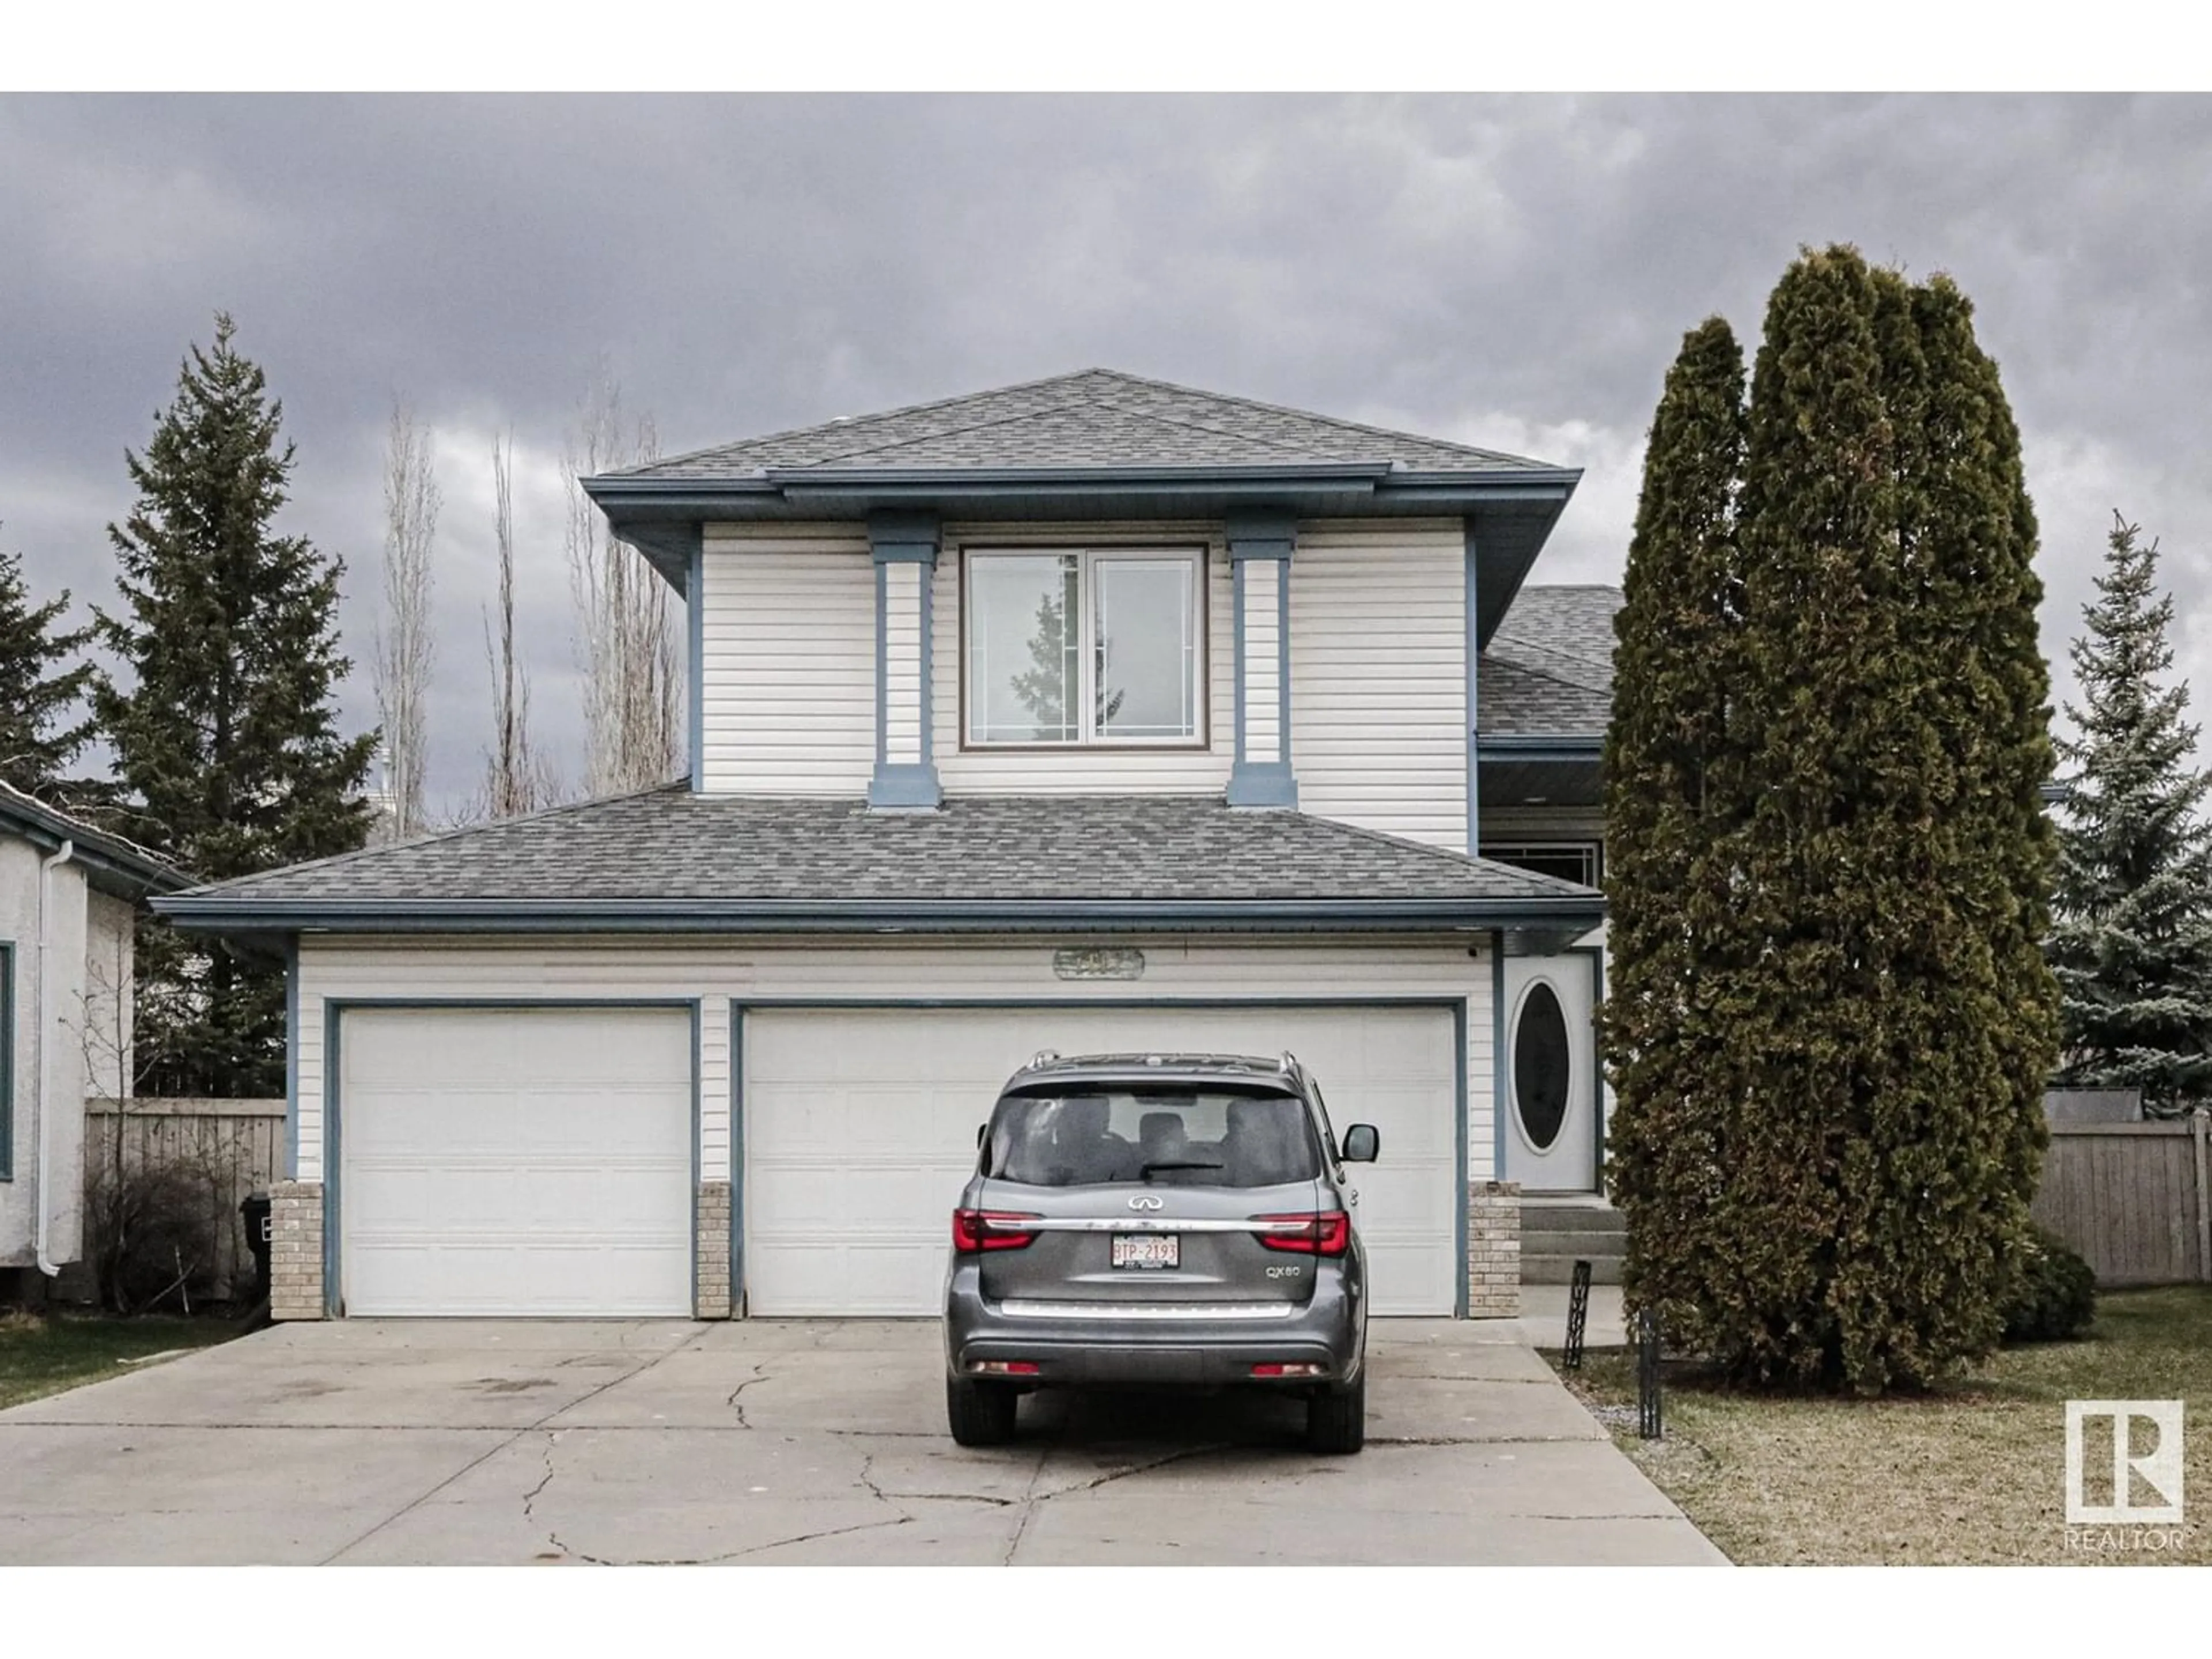 Frontside or backside of a home for 1117 116 ST NW, Edmonton Alberta T6J6X5